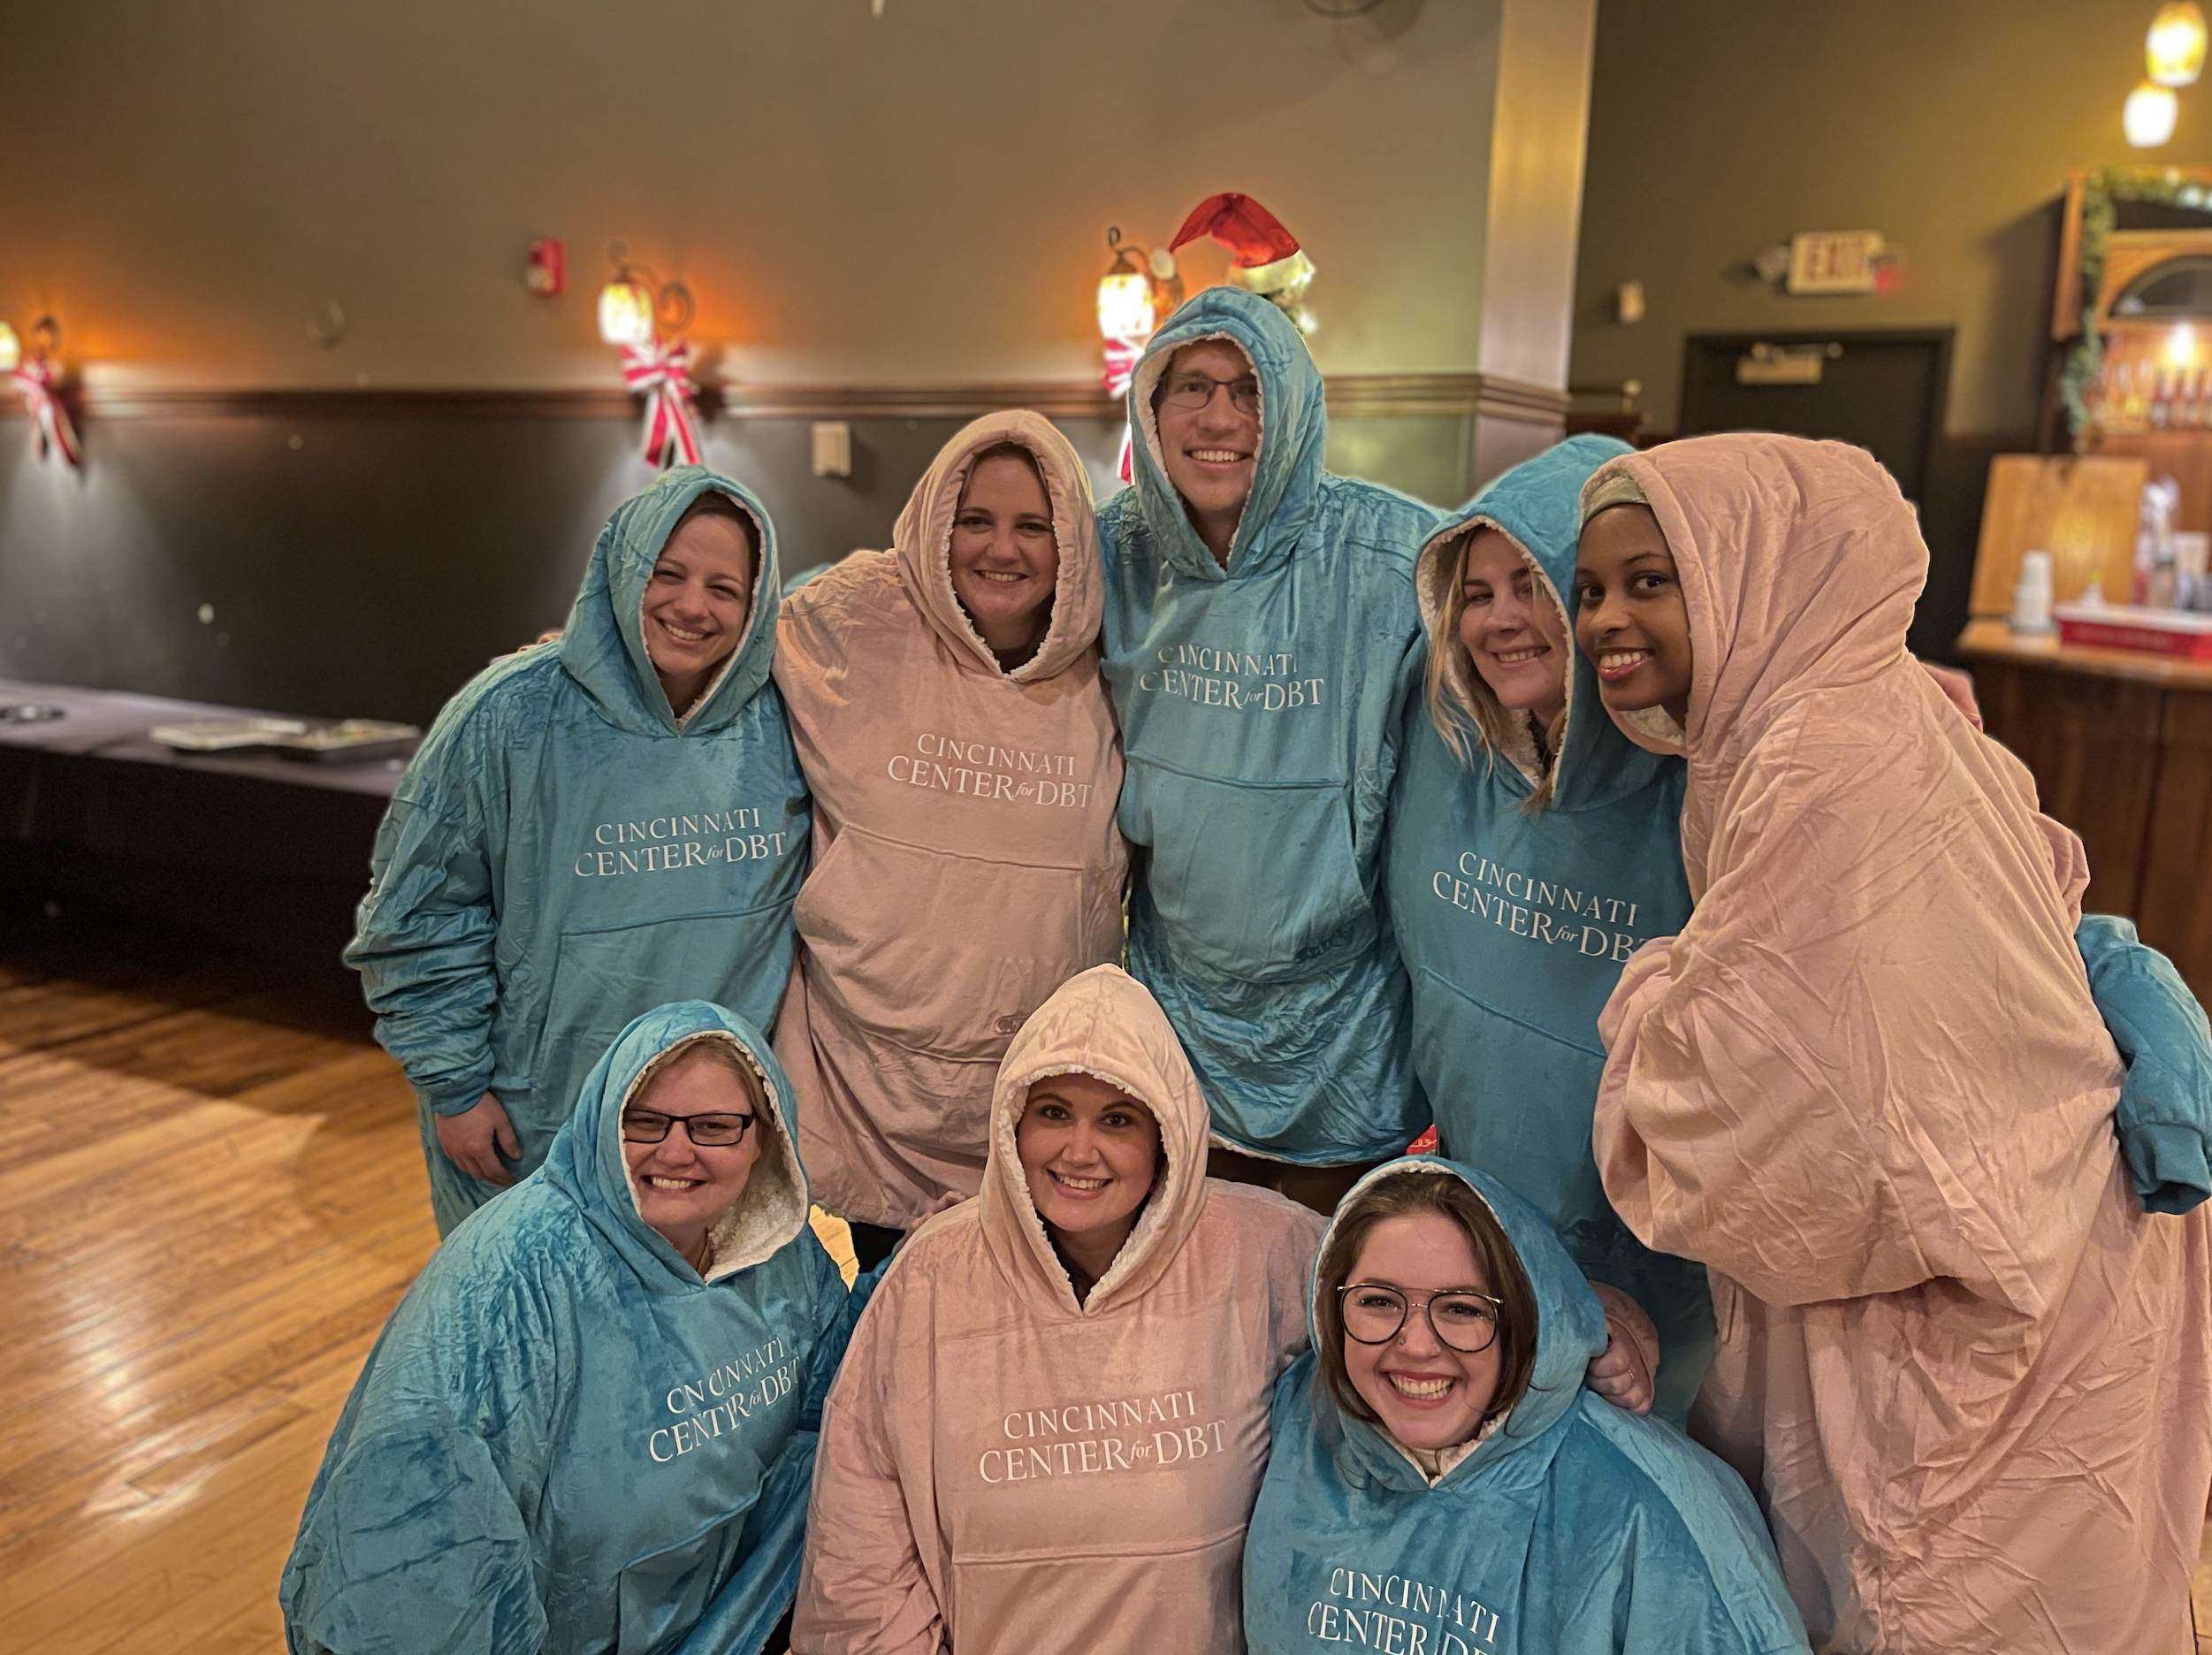 Cincinnati Center for DBT staff dressed in pink and blue Snuggies welcoming you to our office